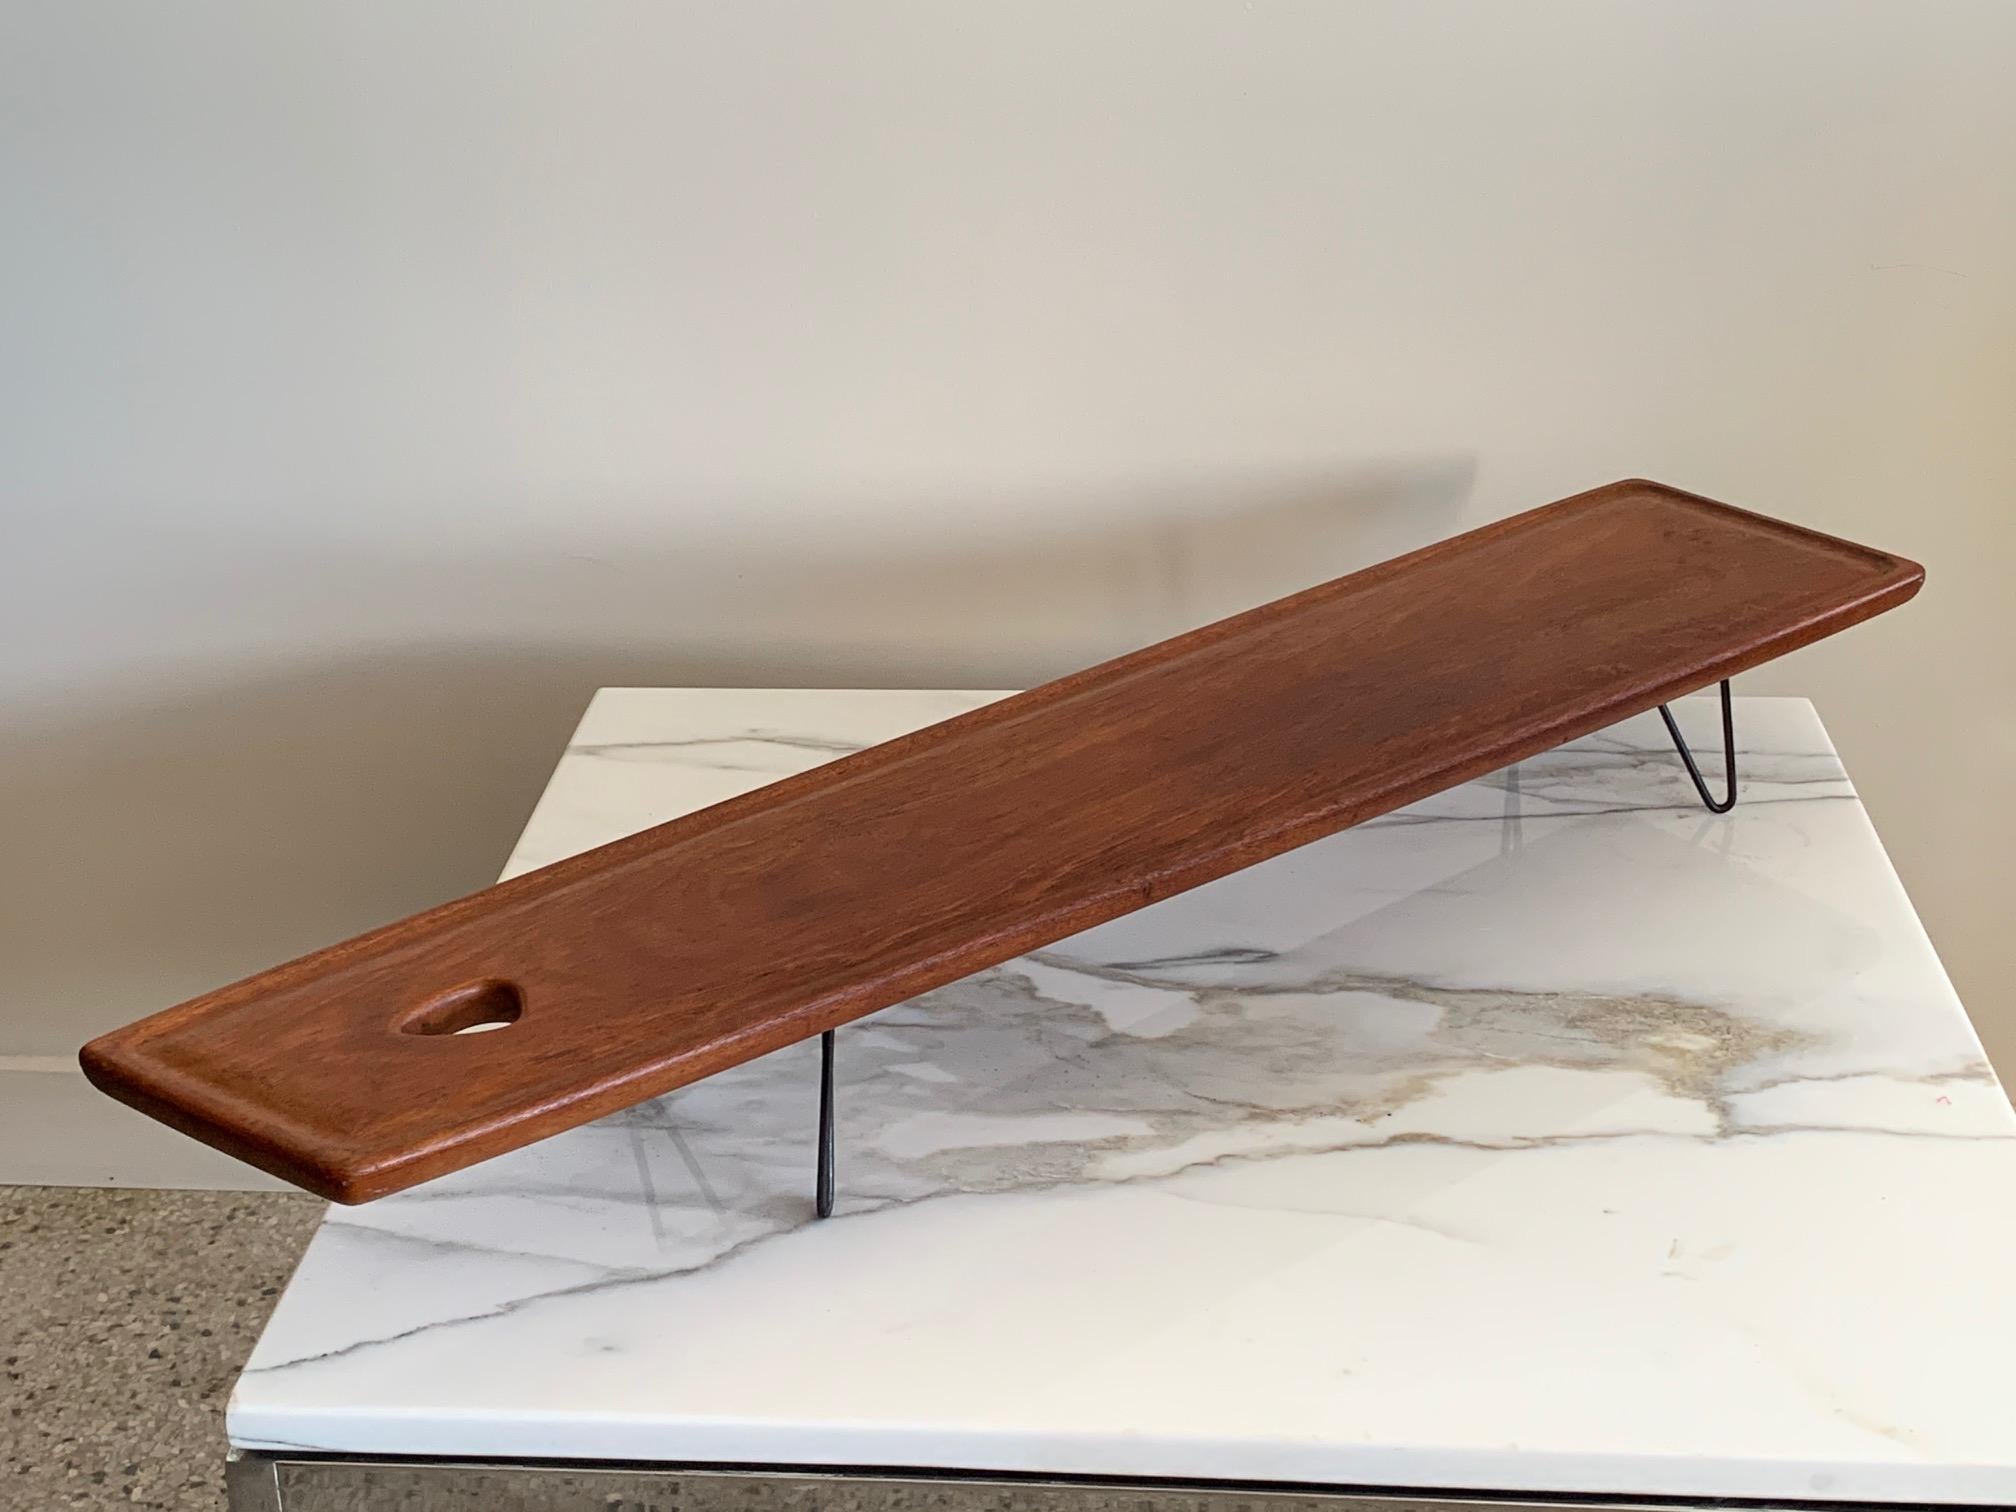 Sculptural Danish Lunch Board in Solid Teak by Johannes Aasbjerg In Good Condition For Sale In St.Petersburg, FL